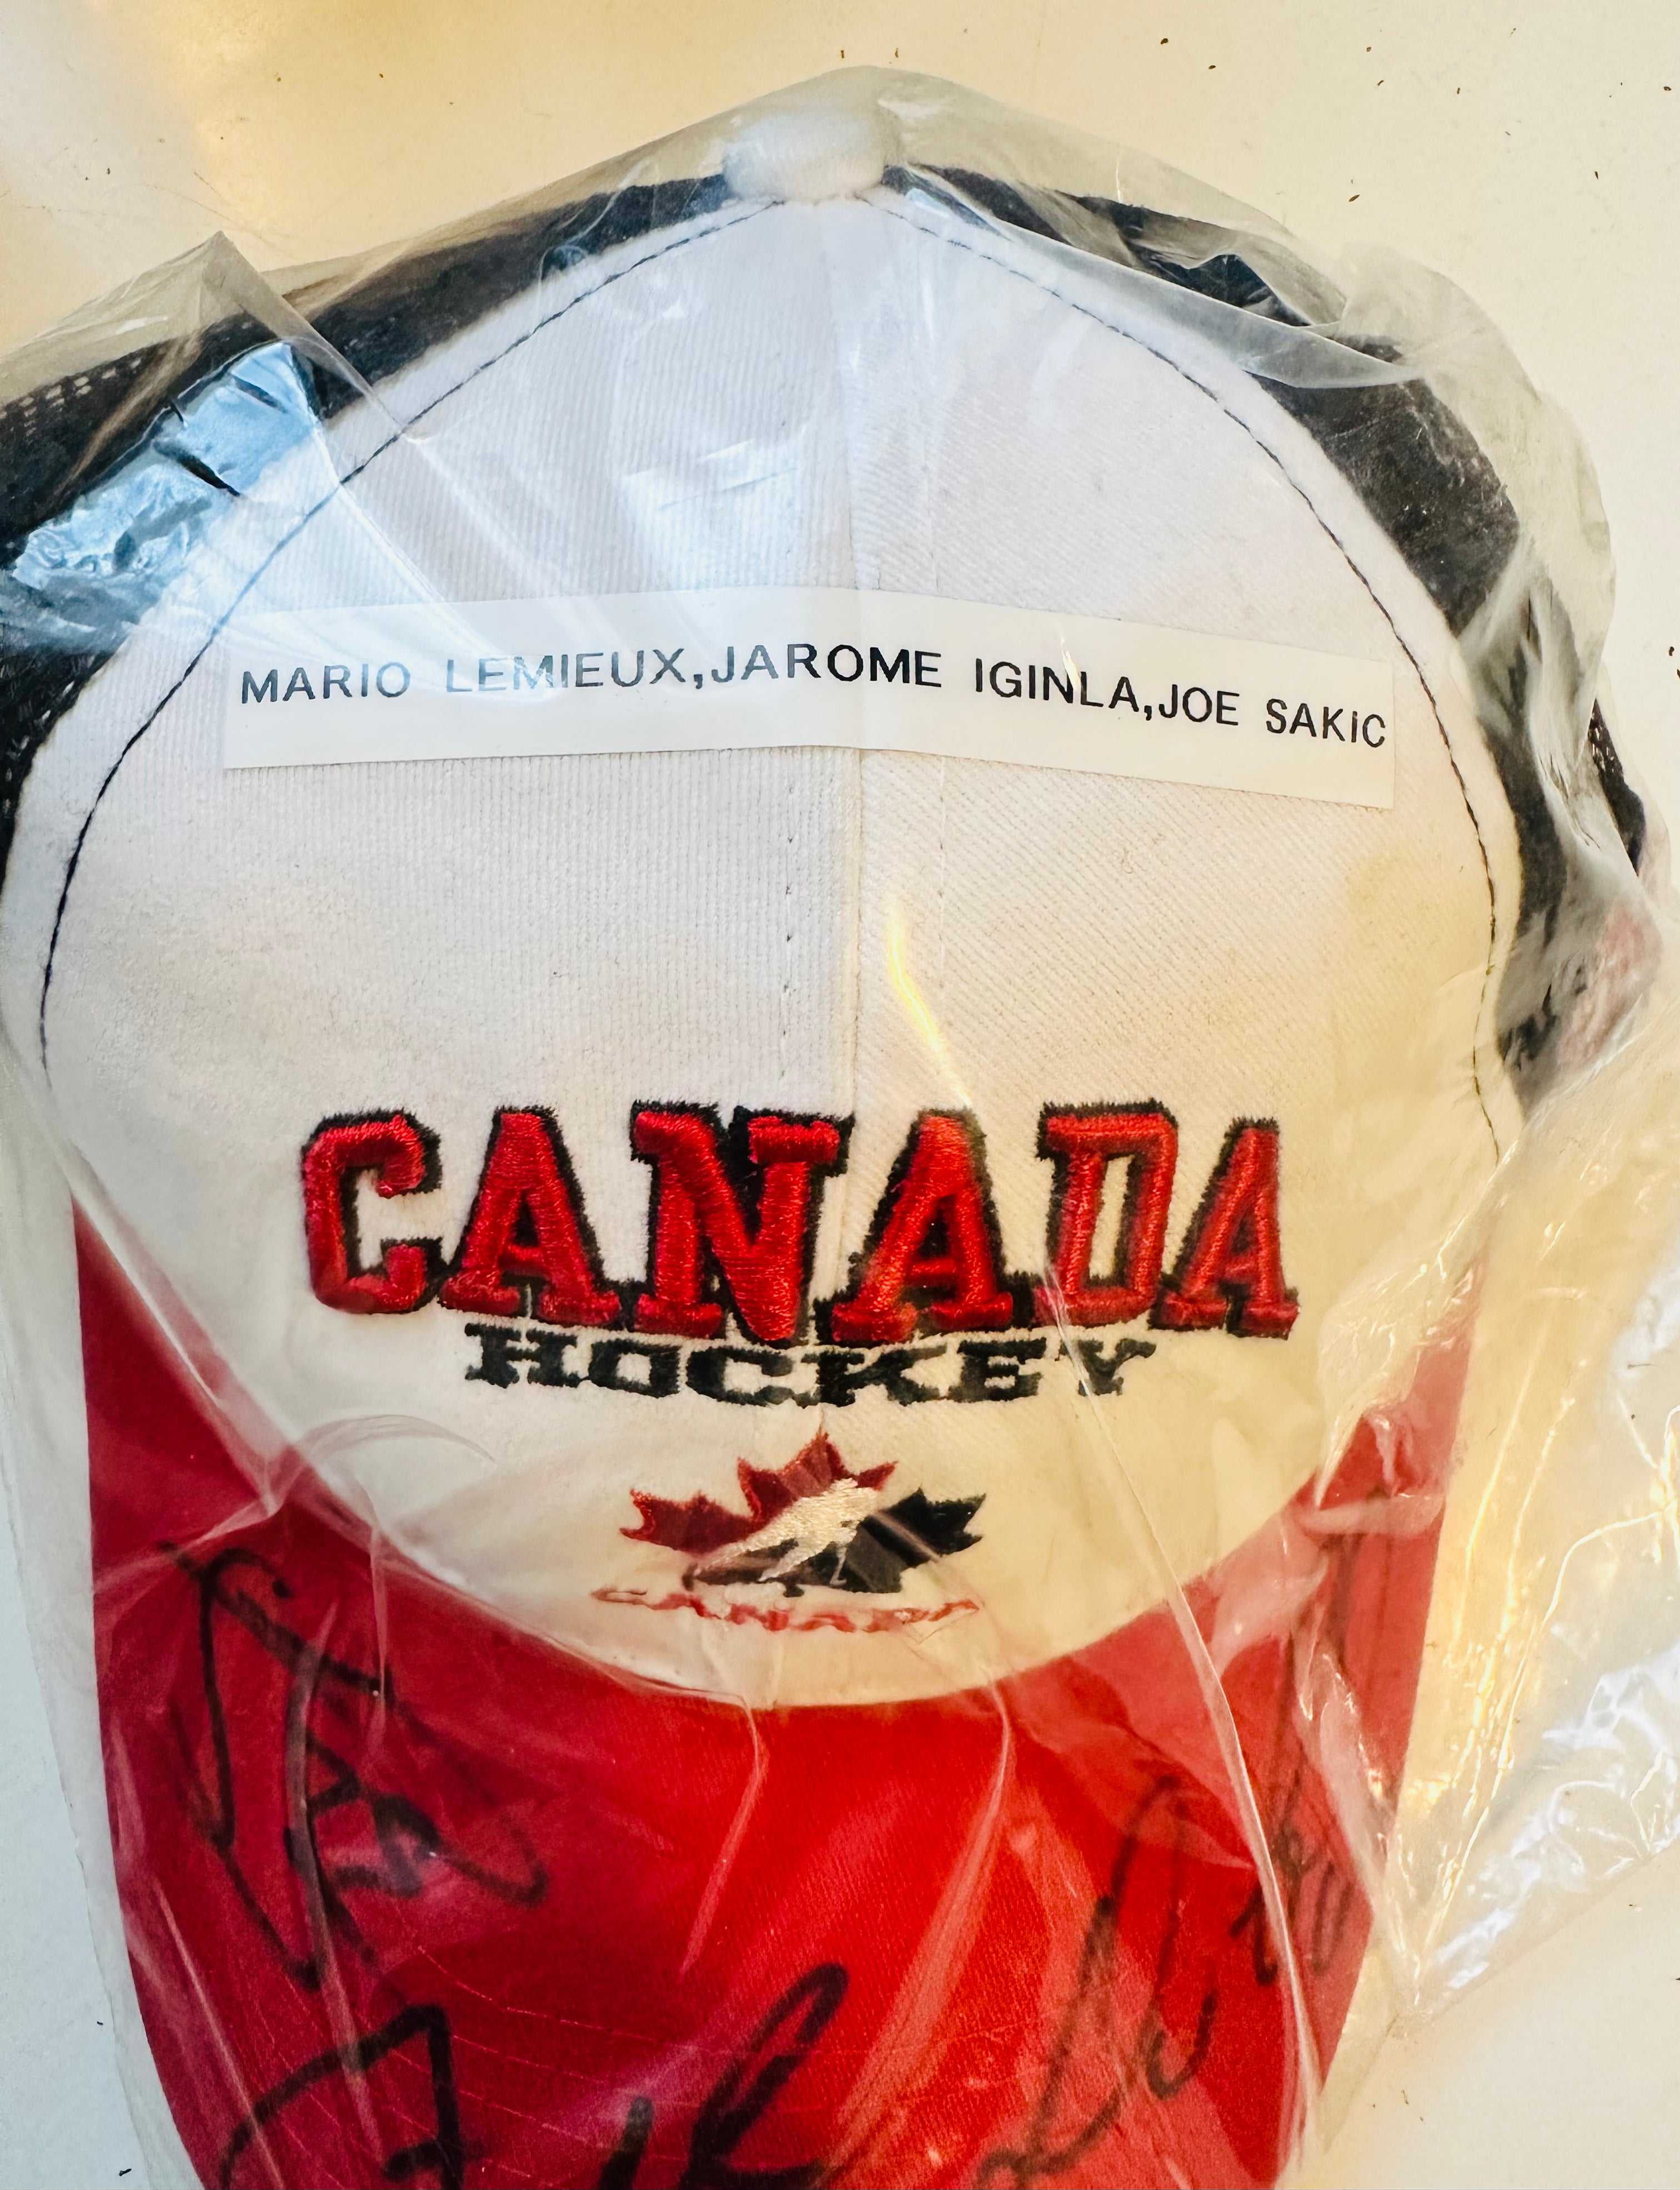 Team Canada Rare triple autograph hat by Mario Lemieux, Sakic and Iginla hat sold with COA